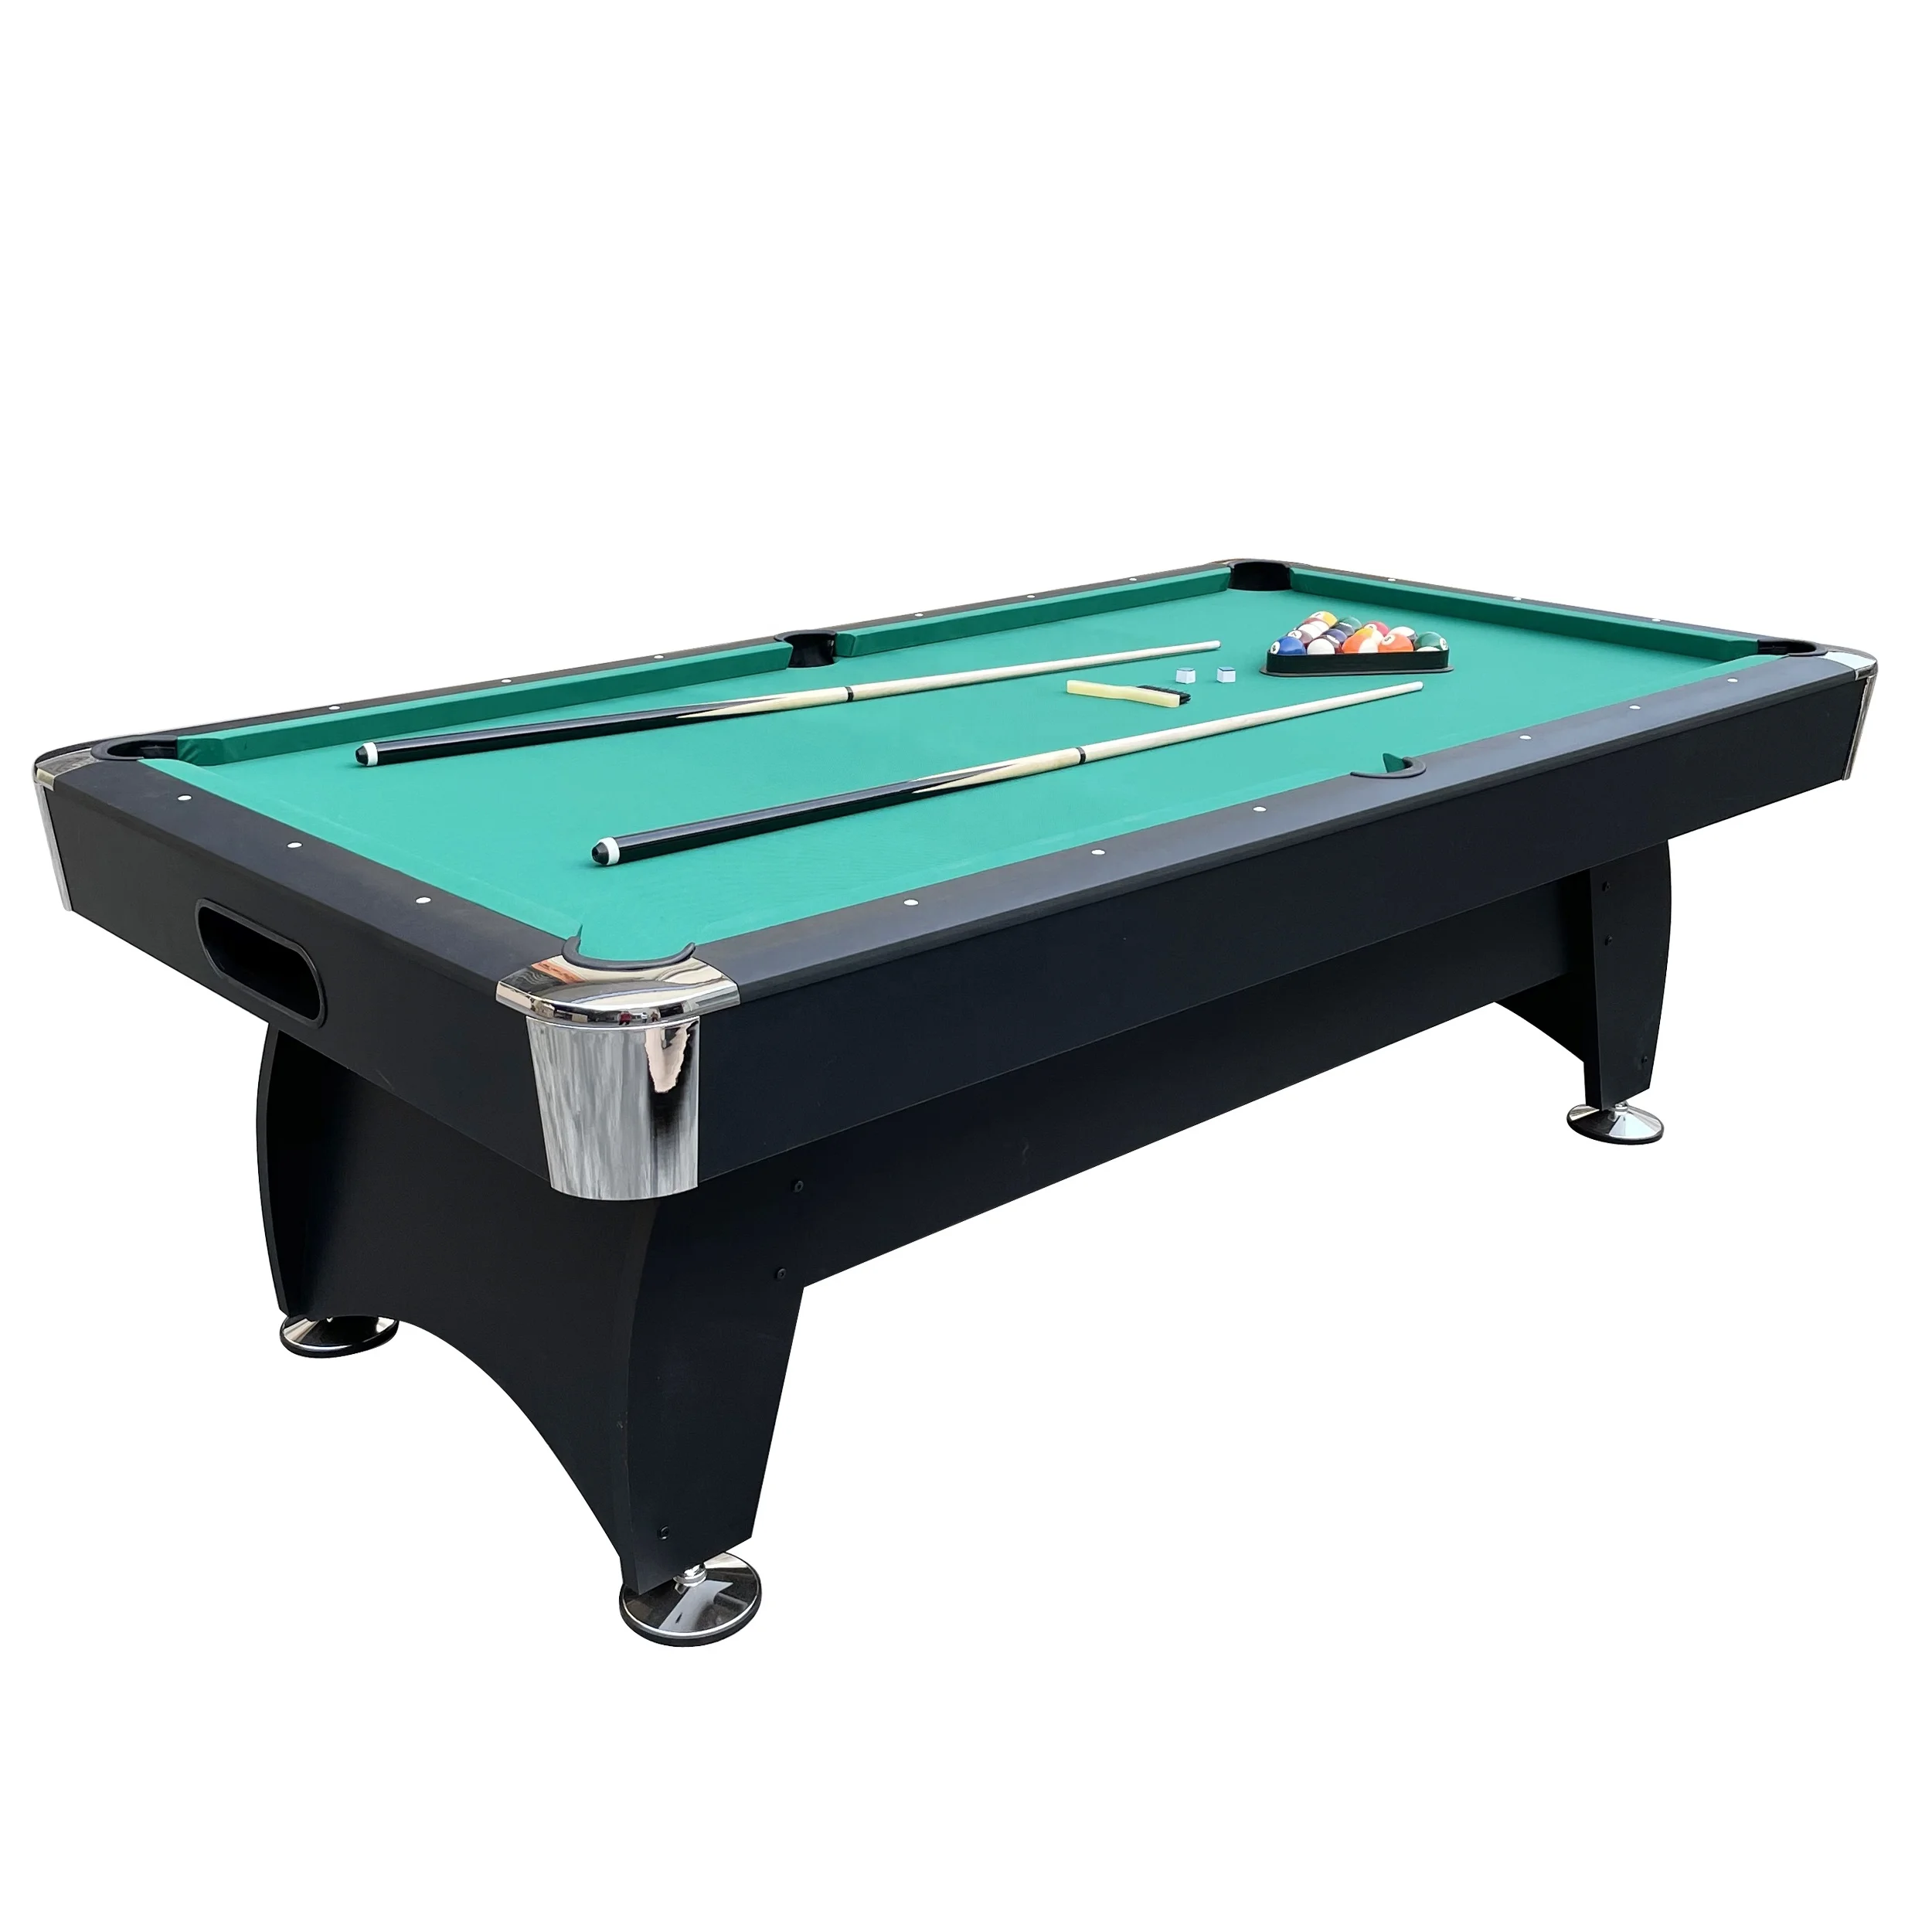 New designed 84 inch 7ft  Billiard & Snooker Pool game table  with all accessories in Green Blue color TP-8406 TP-8407 3 5 inch com35h3p09utc sunlight readable tft lcd 480x640 lcd pda panel designed for handheld